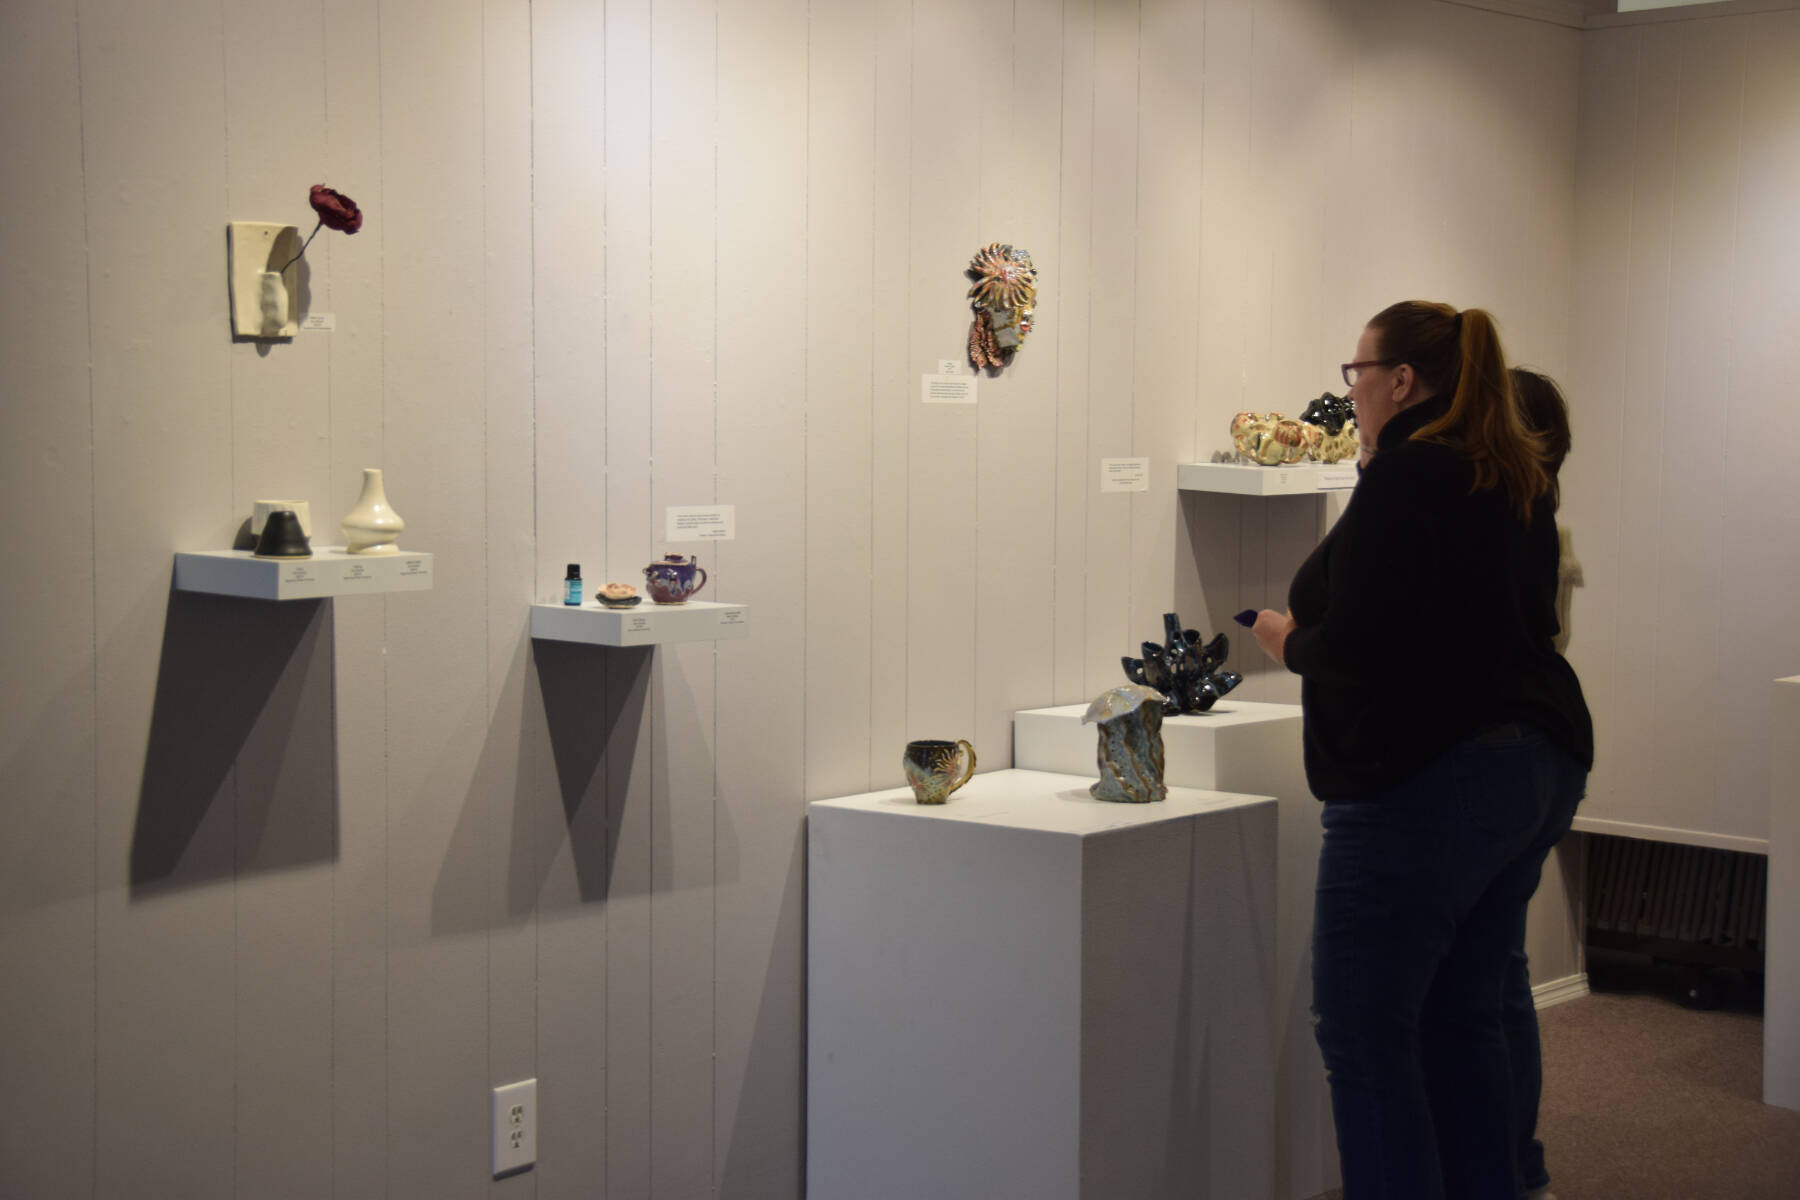 Community members peruses the ceramics on display at Homer Council on the Arts’ First Friday showcase on Sept. 1 in Homer, Alaska. (Delcenia Cosman/Homer News)